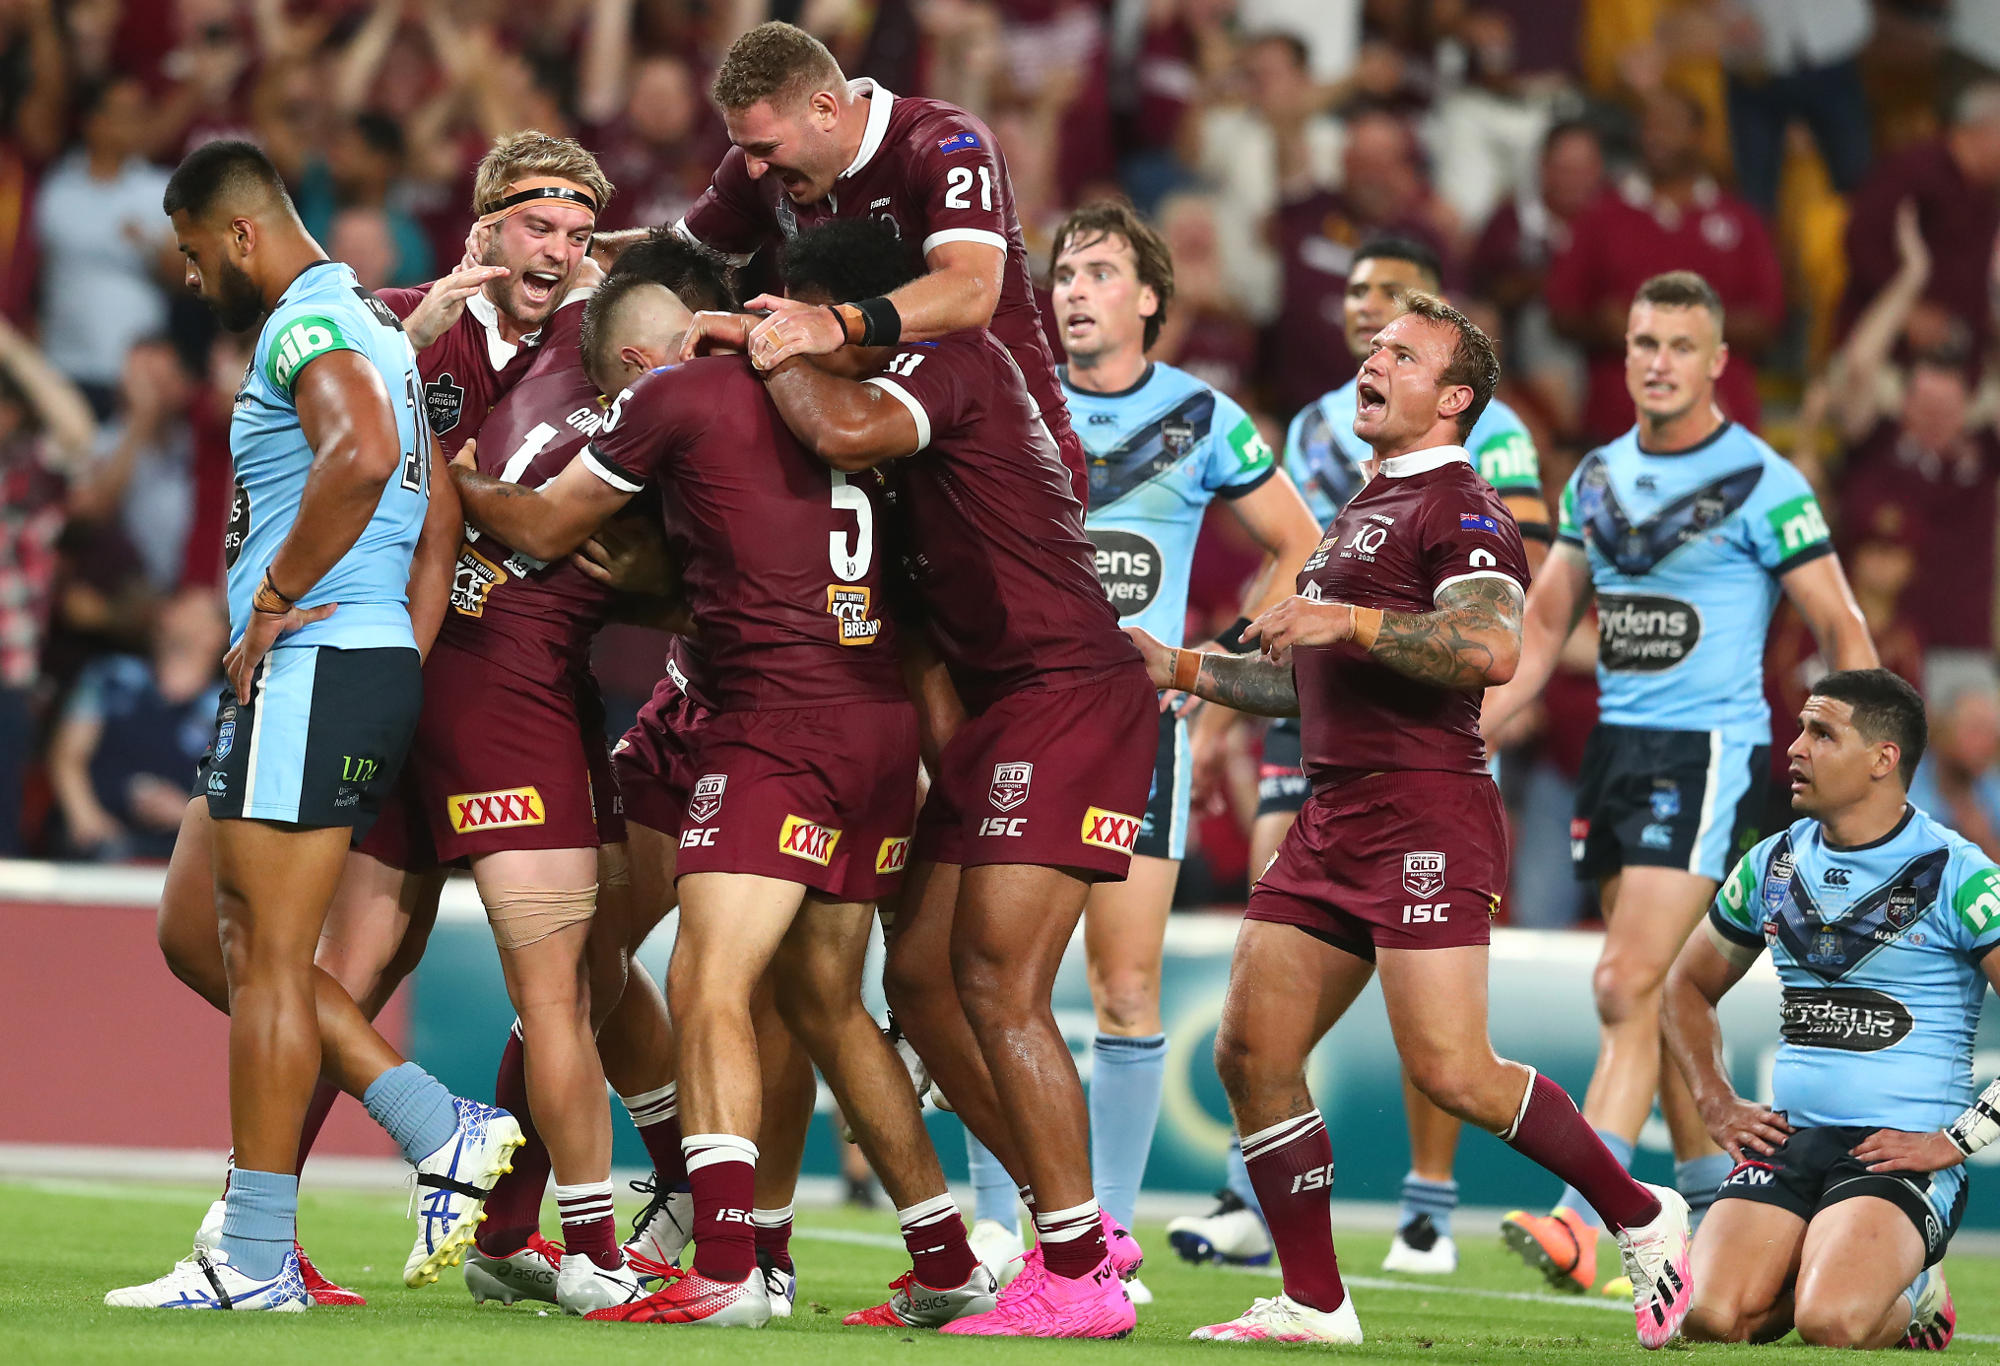 Maroons celebrate a try by Harry Grant during game three of the State of Origin series